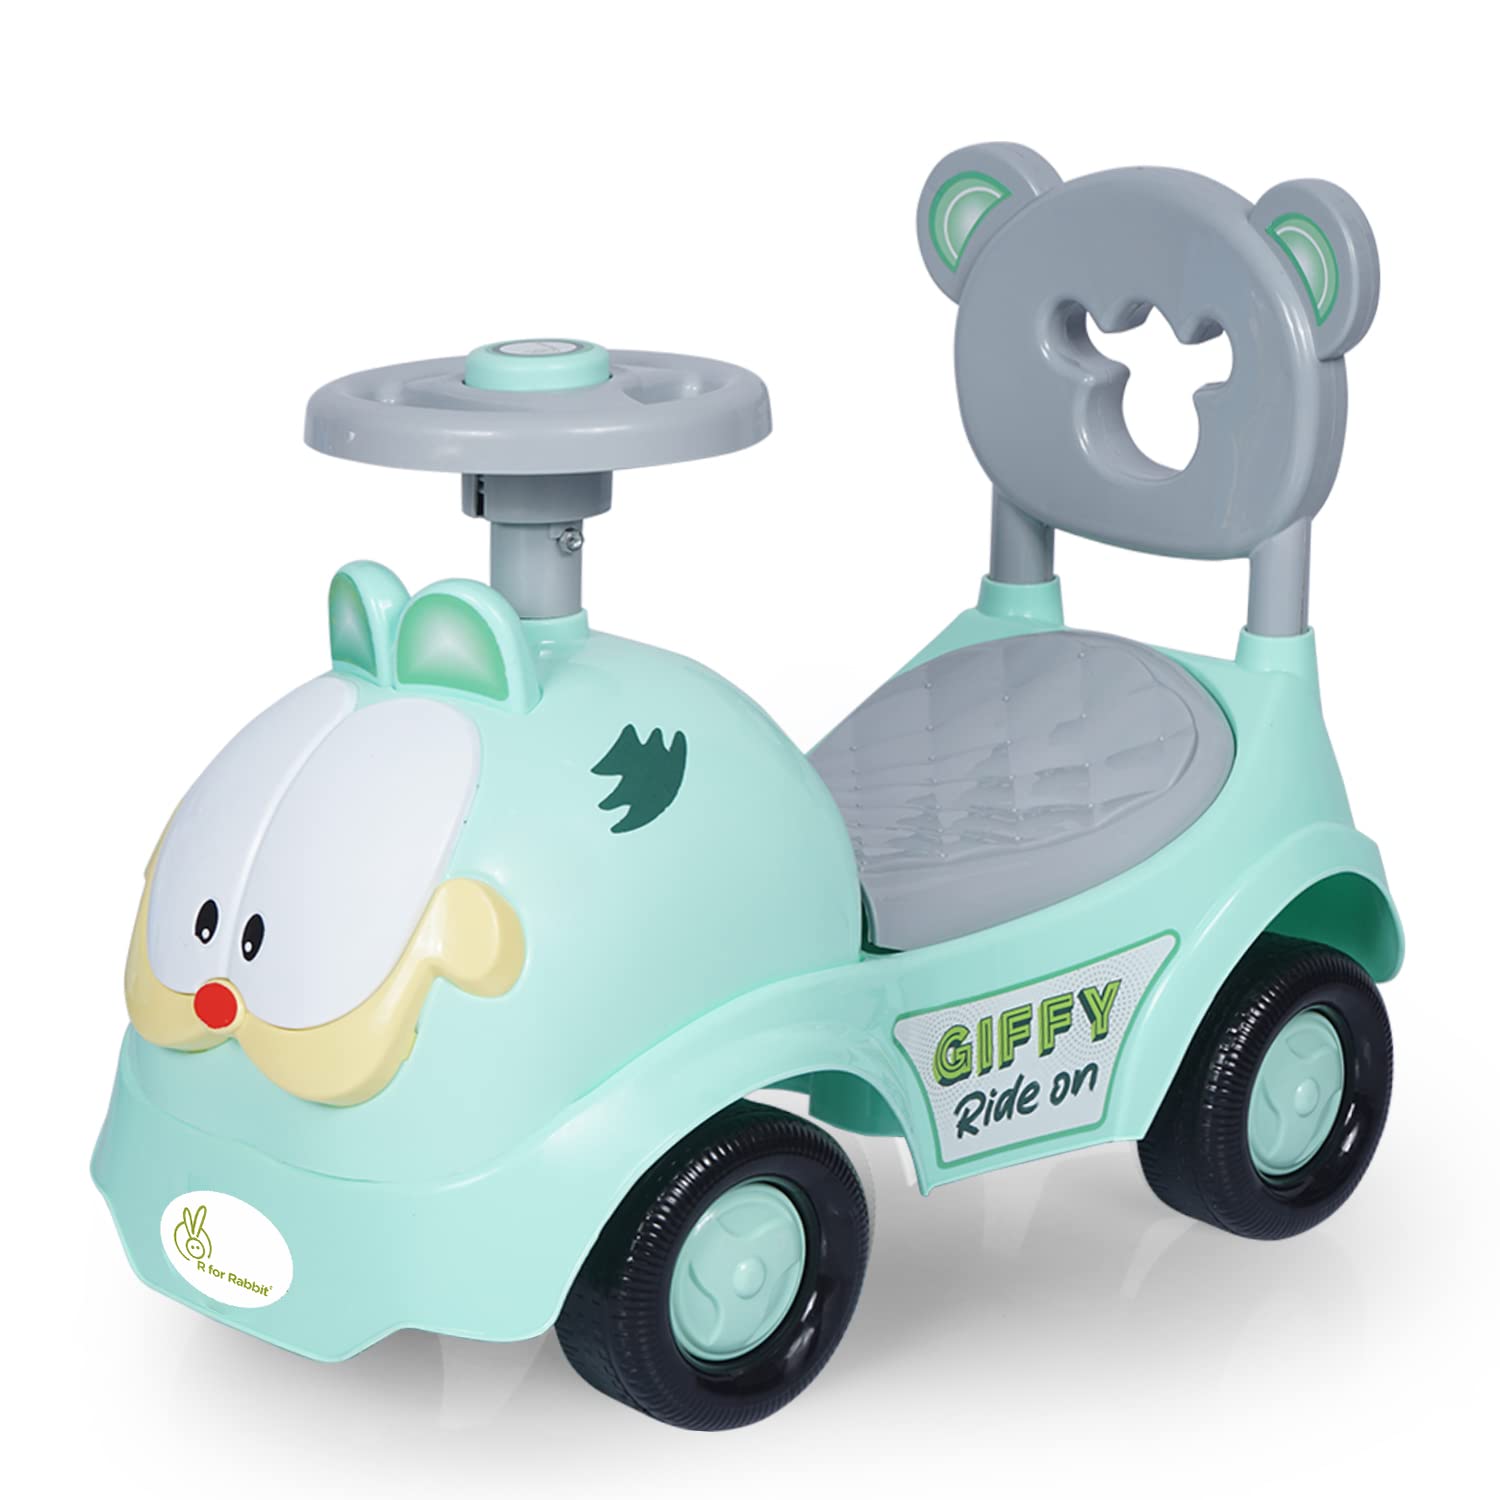 R for Rabbit Giffy Baby Push Ride on